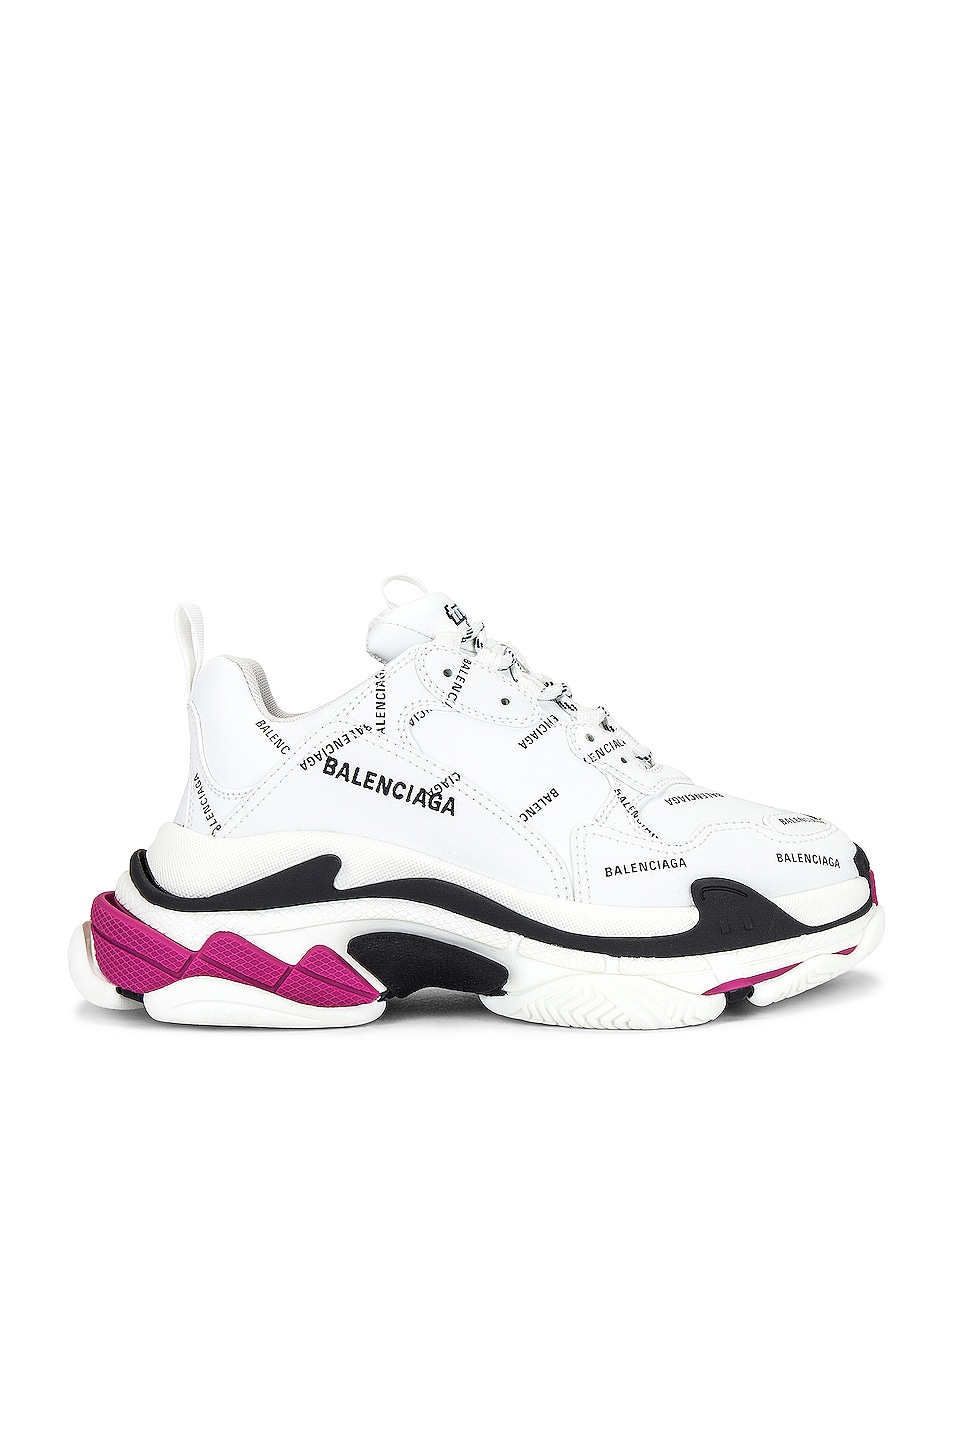 Image 1 of Balenciaga Triple S Sneakers in White & Black & Fluo Pink